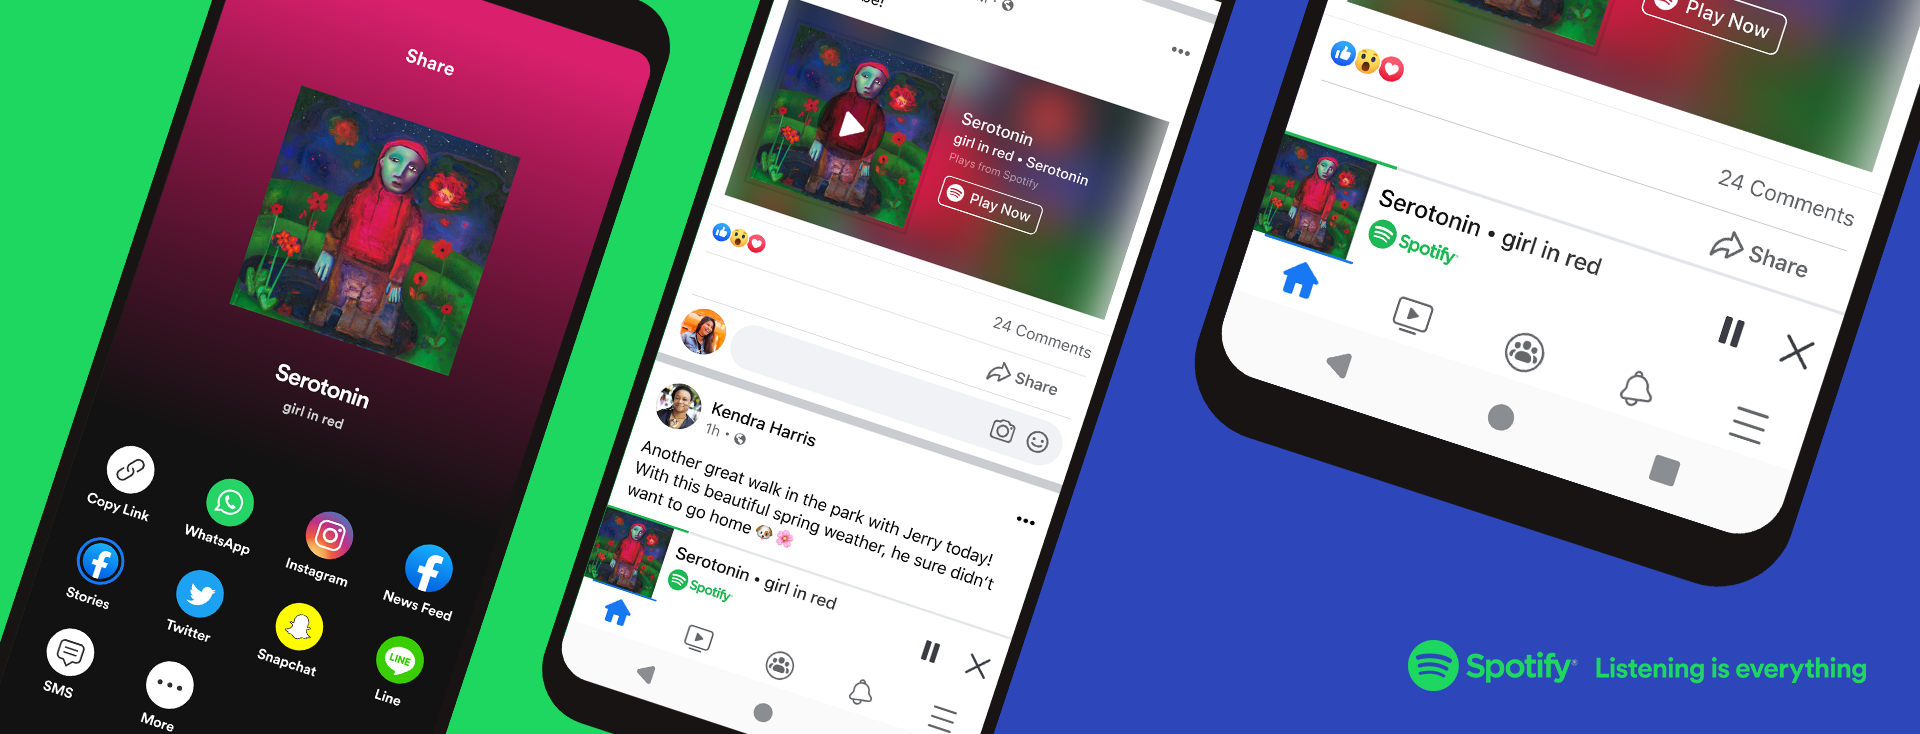 Spotify’s new miniplayer lets listeners stream whole songs without leaving Facebook